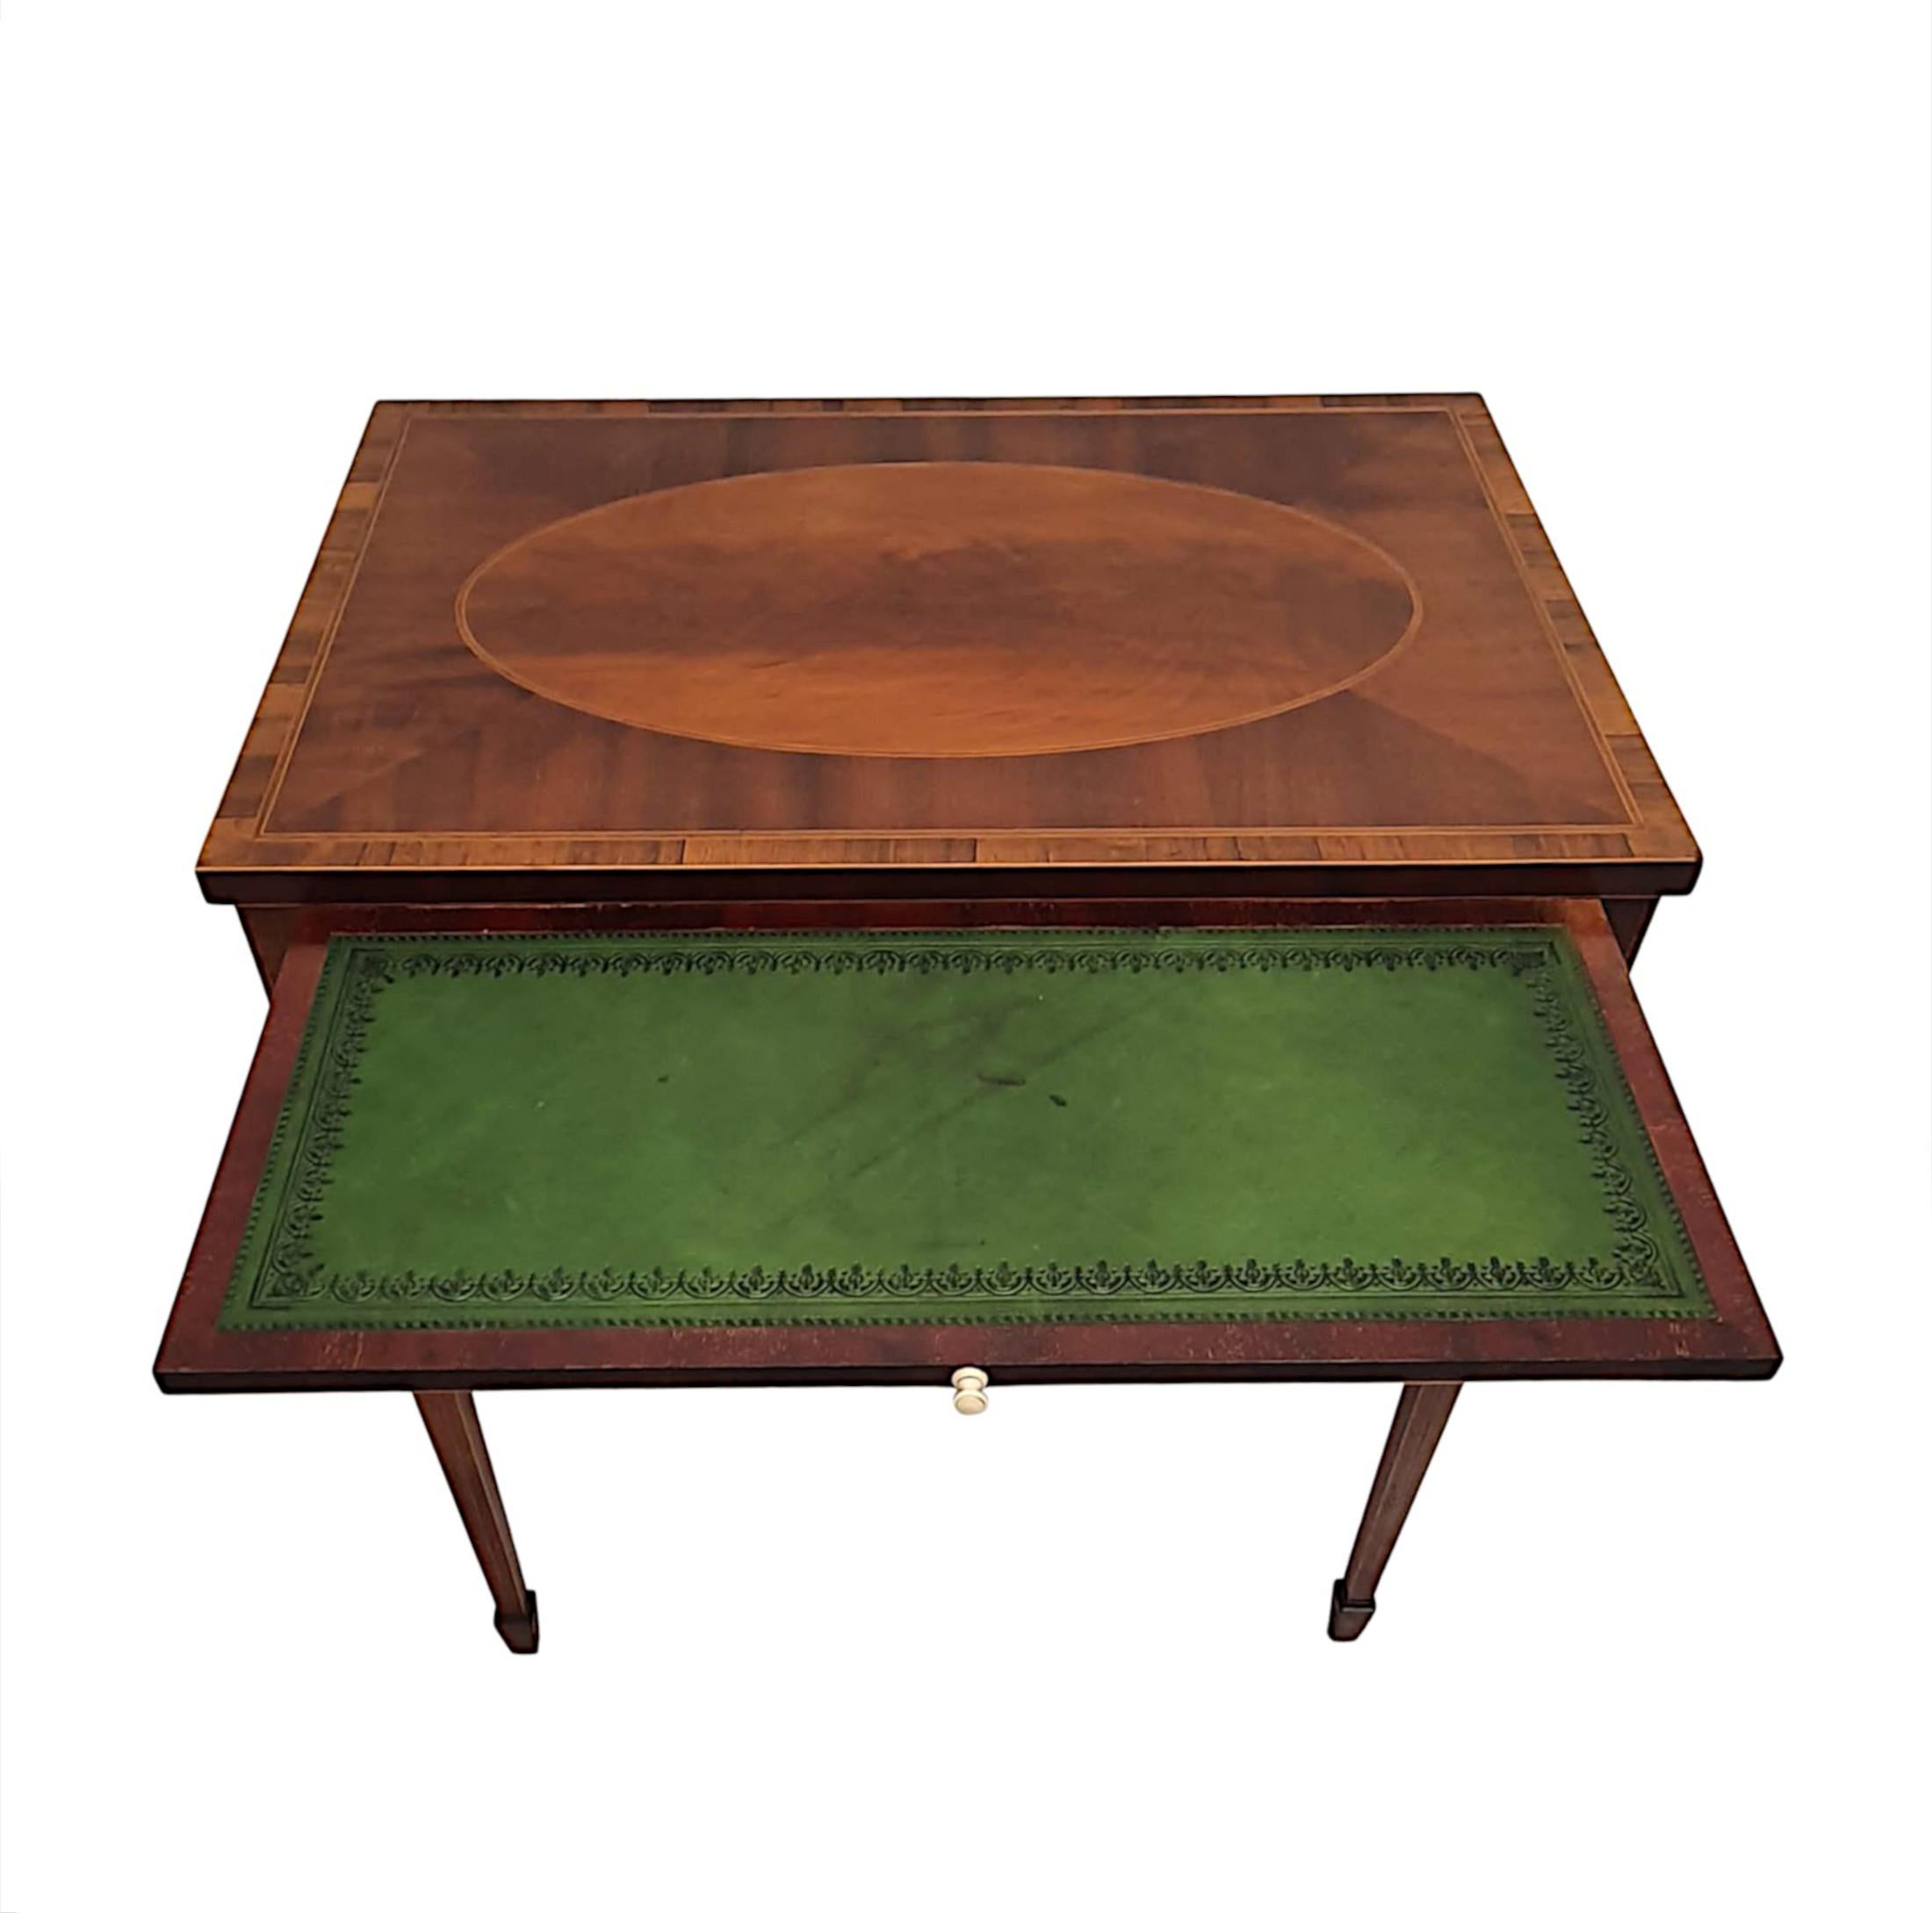 A gorgeous Edwardian inlaid side or writing table, finely carved and of fabulous quality with richly patinated timbers comprising of mahogany and fruitwood. The moulded cross banded, quarter veneered top of rectangular form with a lovely inlaid oval